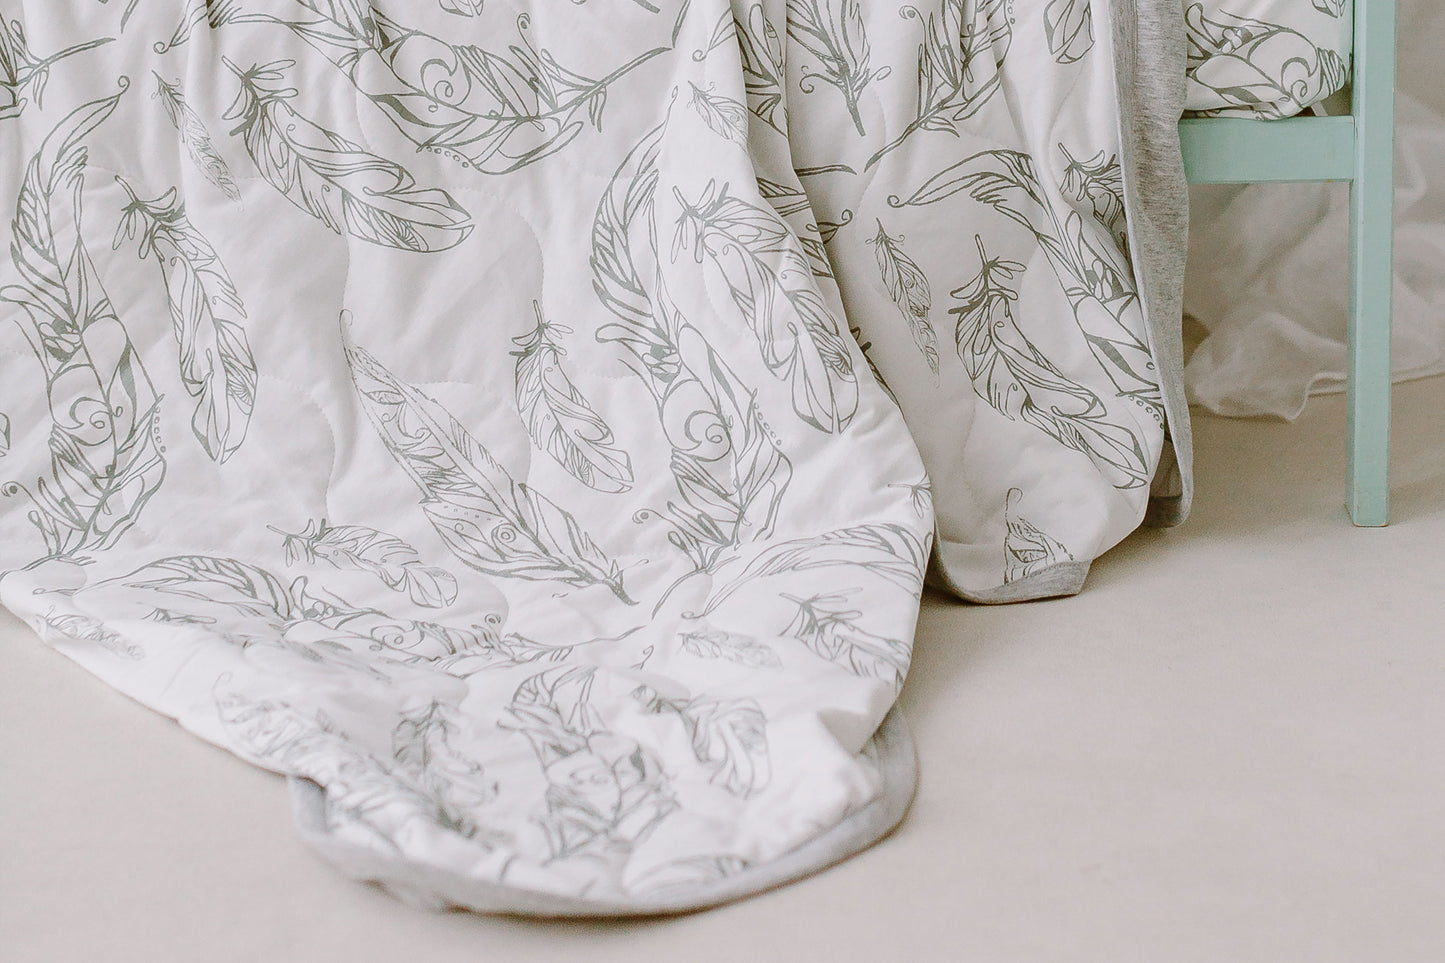 Large Cozy Quilted Blanket (Bamboo Jersey) - Feather White